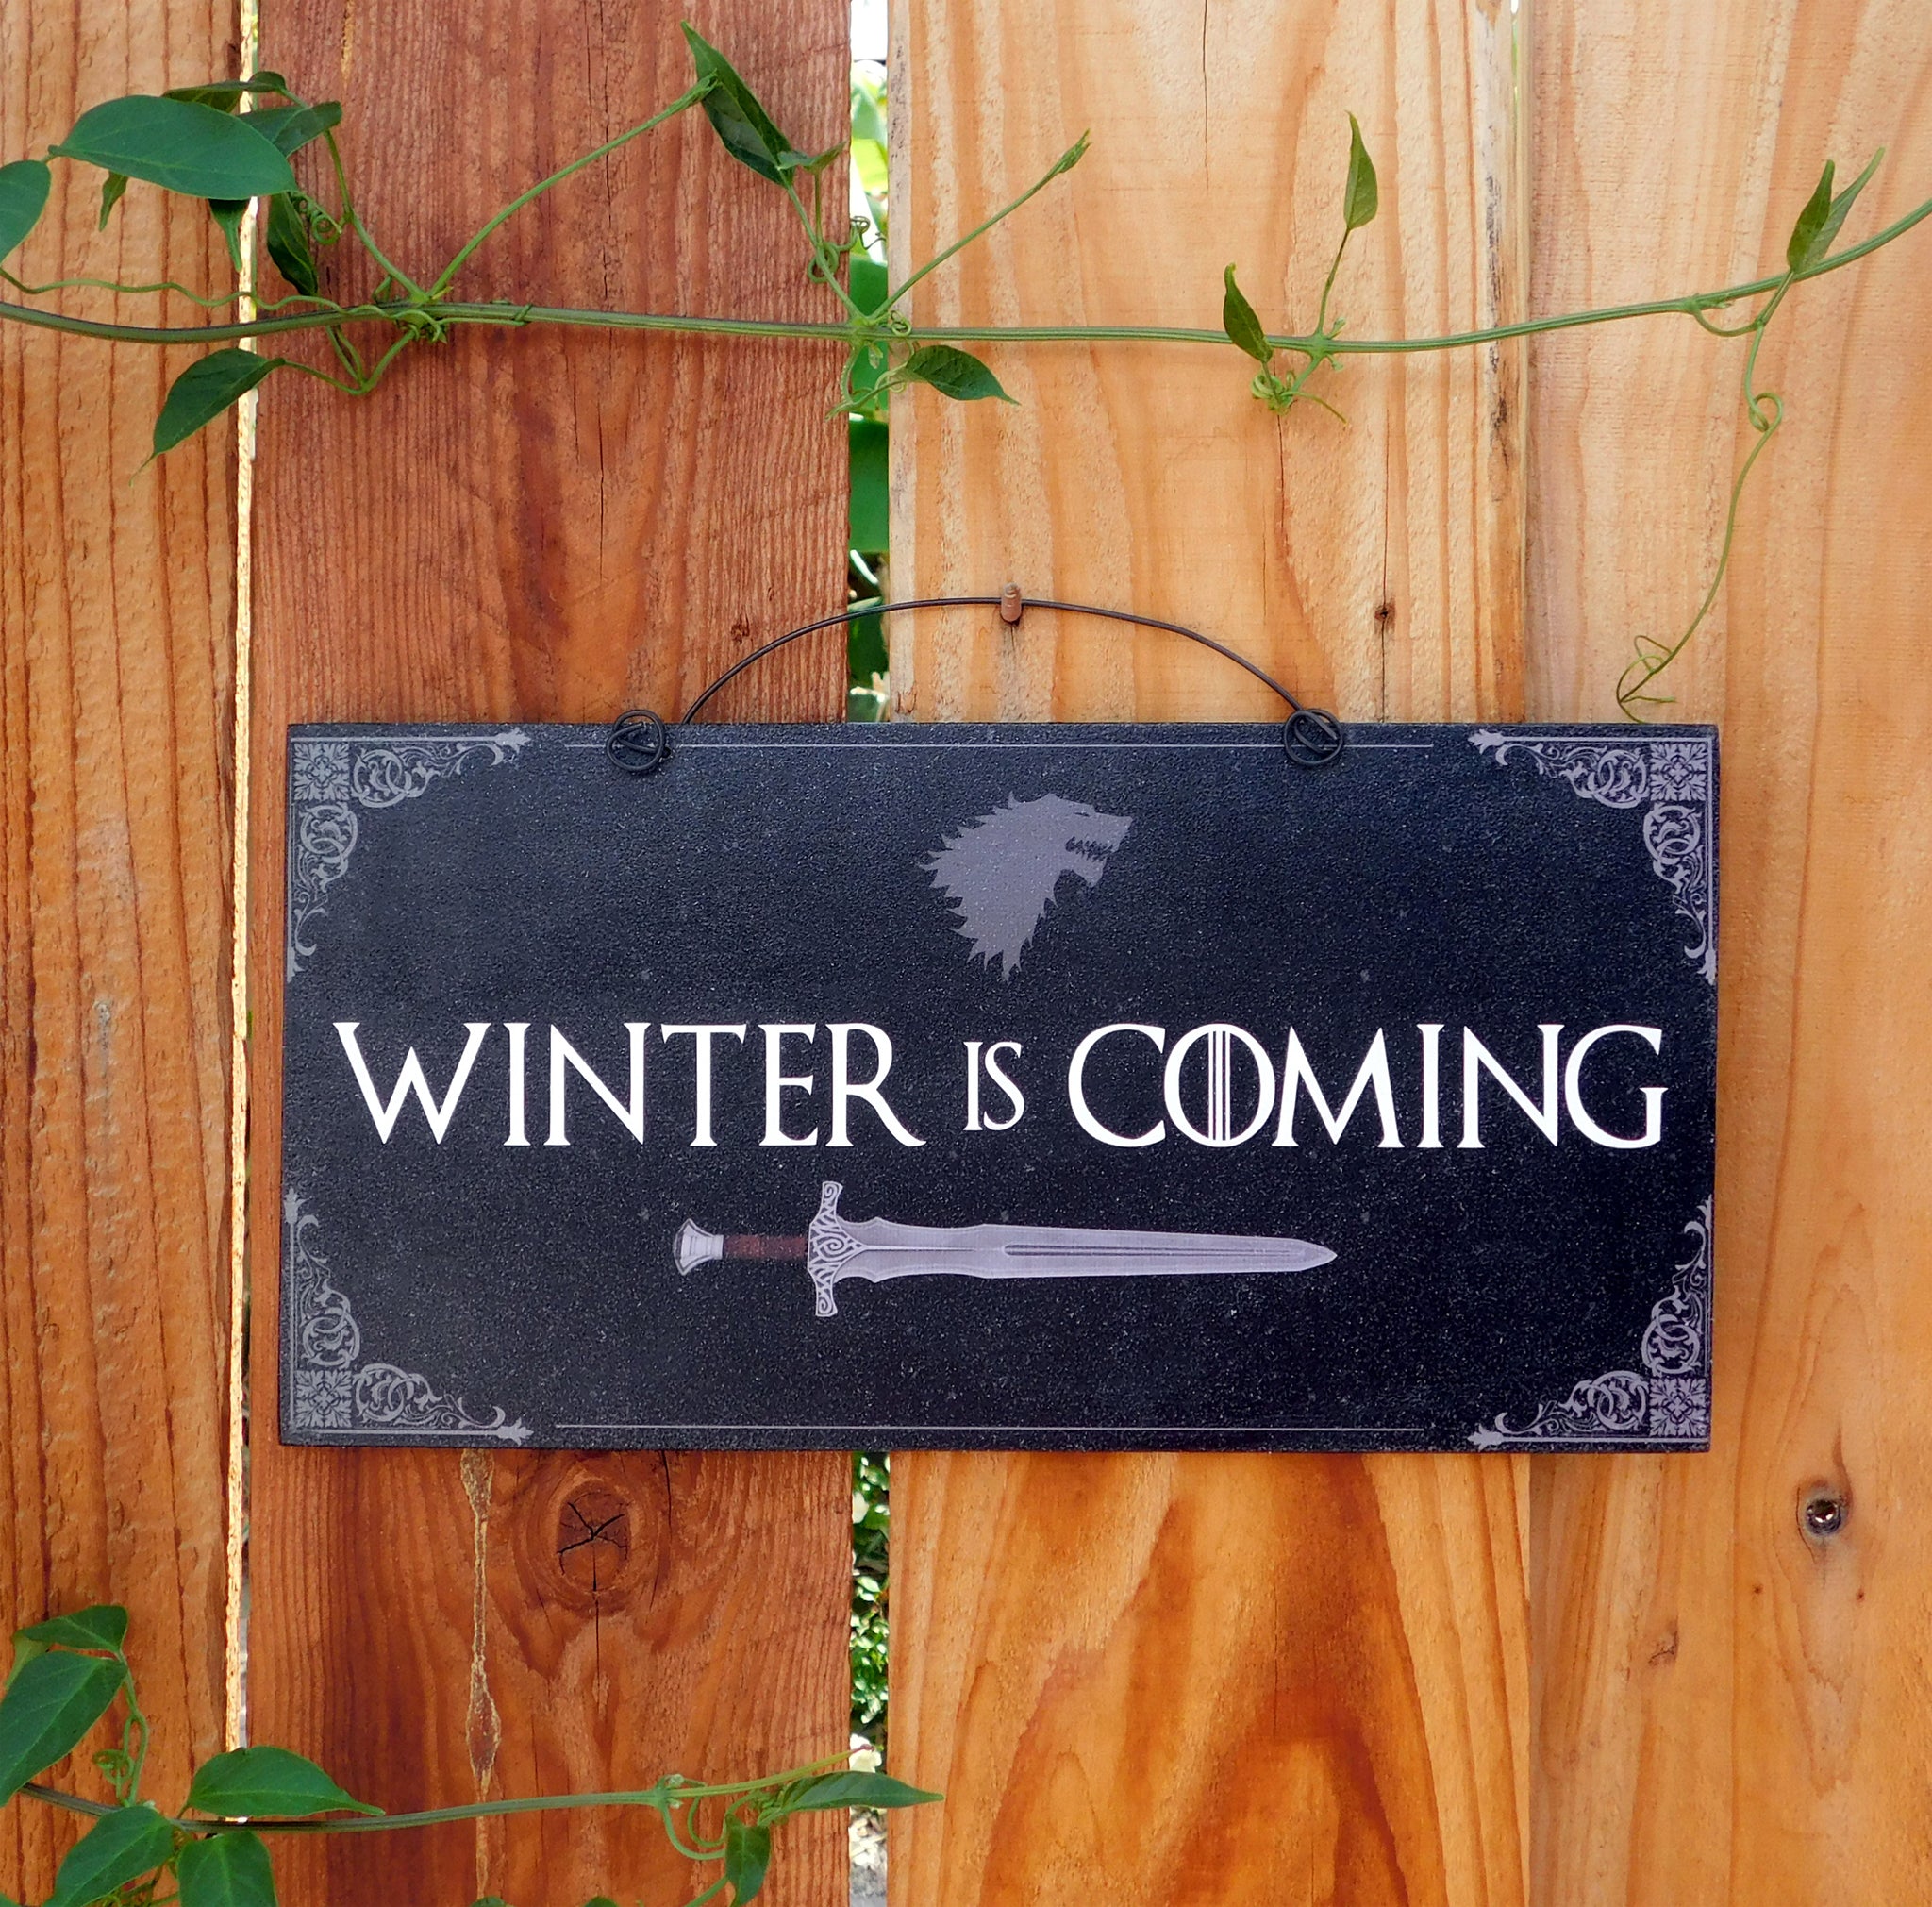 Winter is Coming sign.